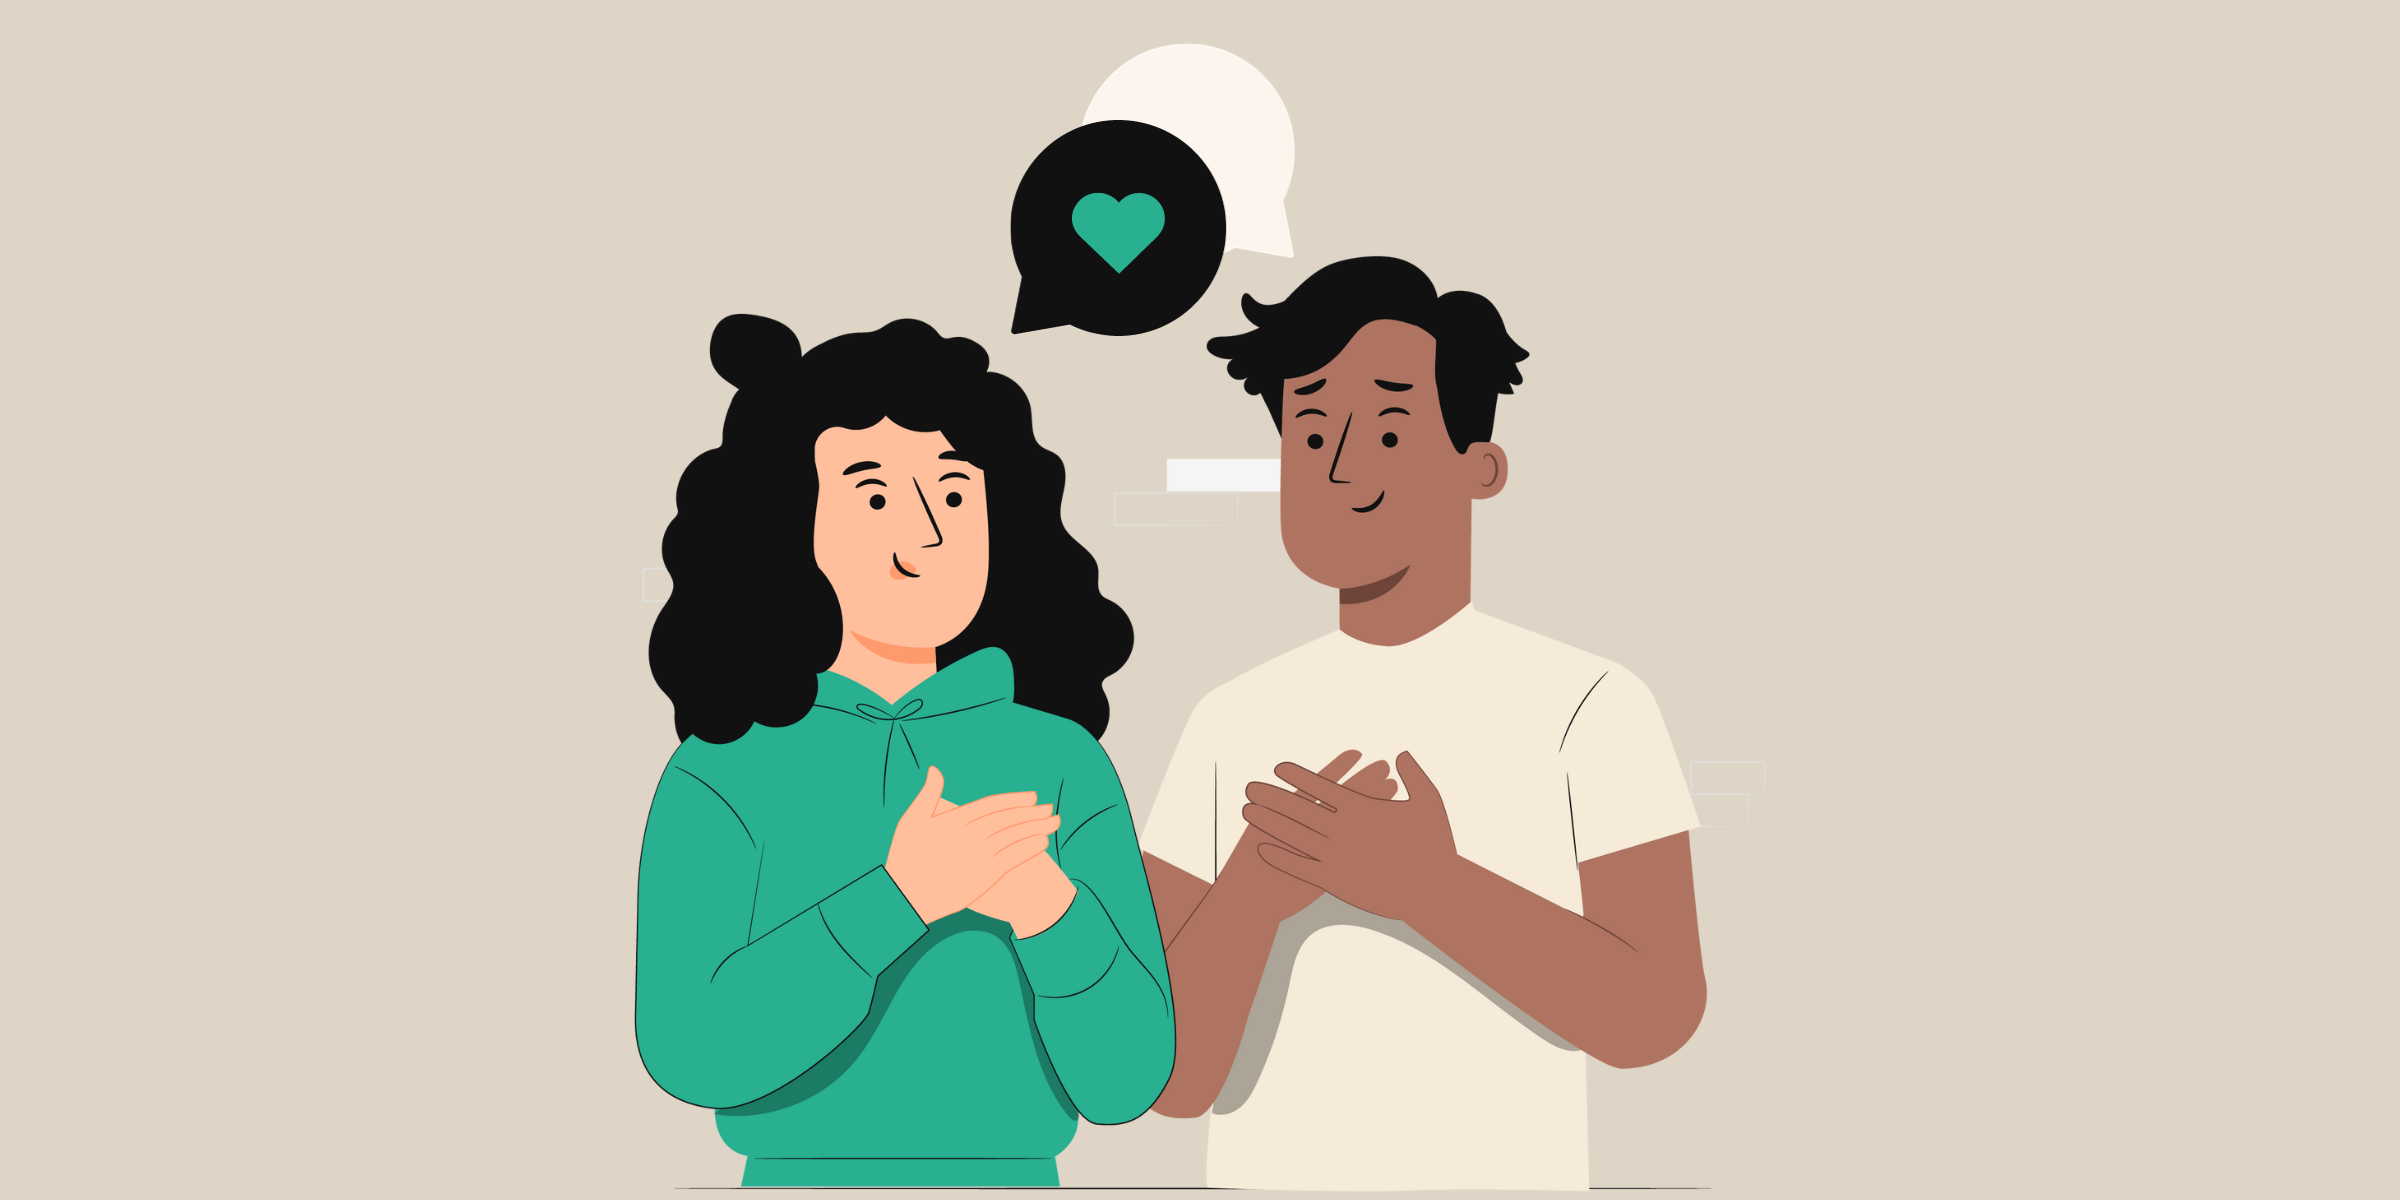 Dating as an introvert can be hard, but it's not impossible. This guide is filled with helpful tips for dating success!